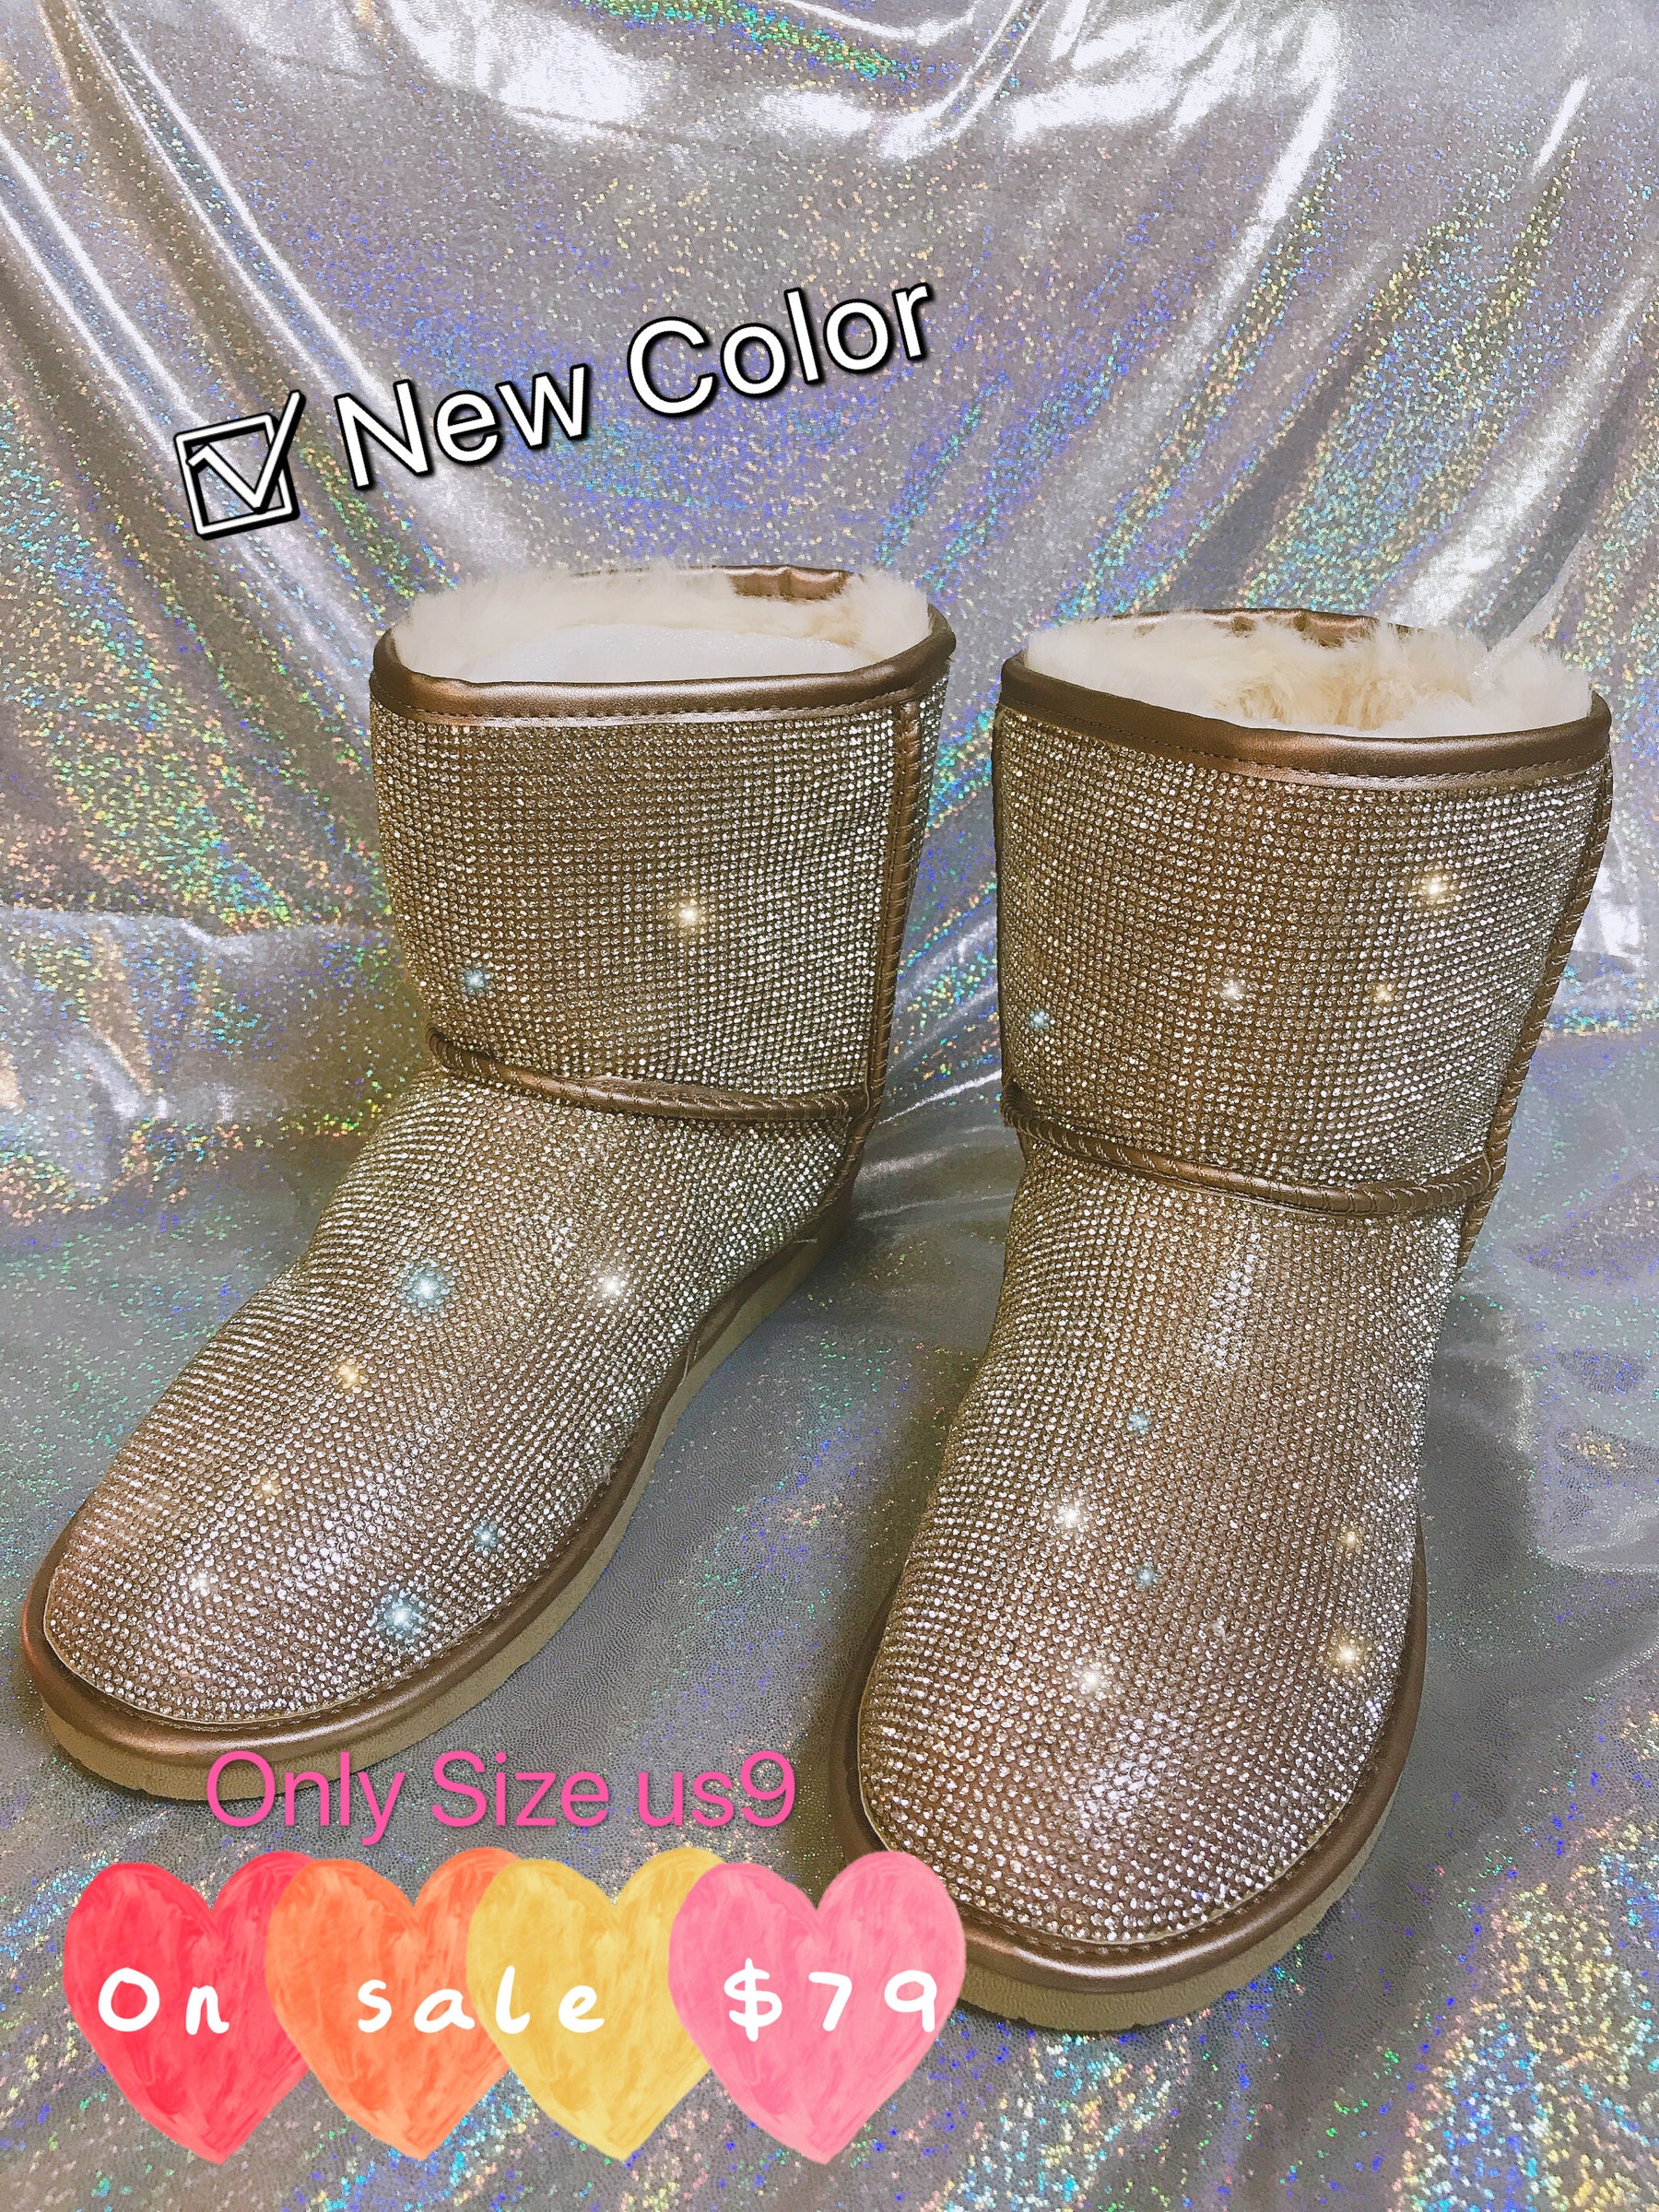 New Color Super Bling and Sparkly Short SheepSkin Wool BOOTS w shinning Czech crystals